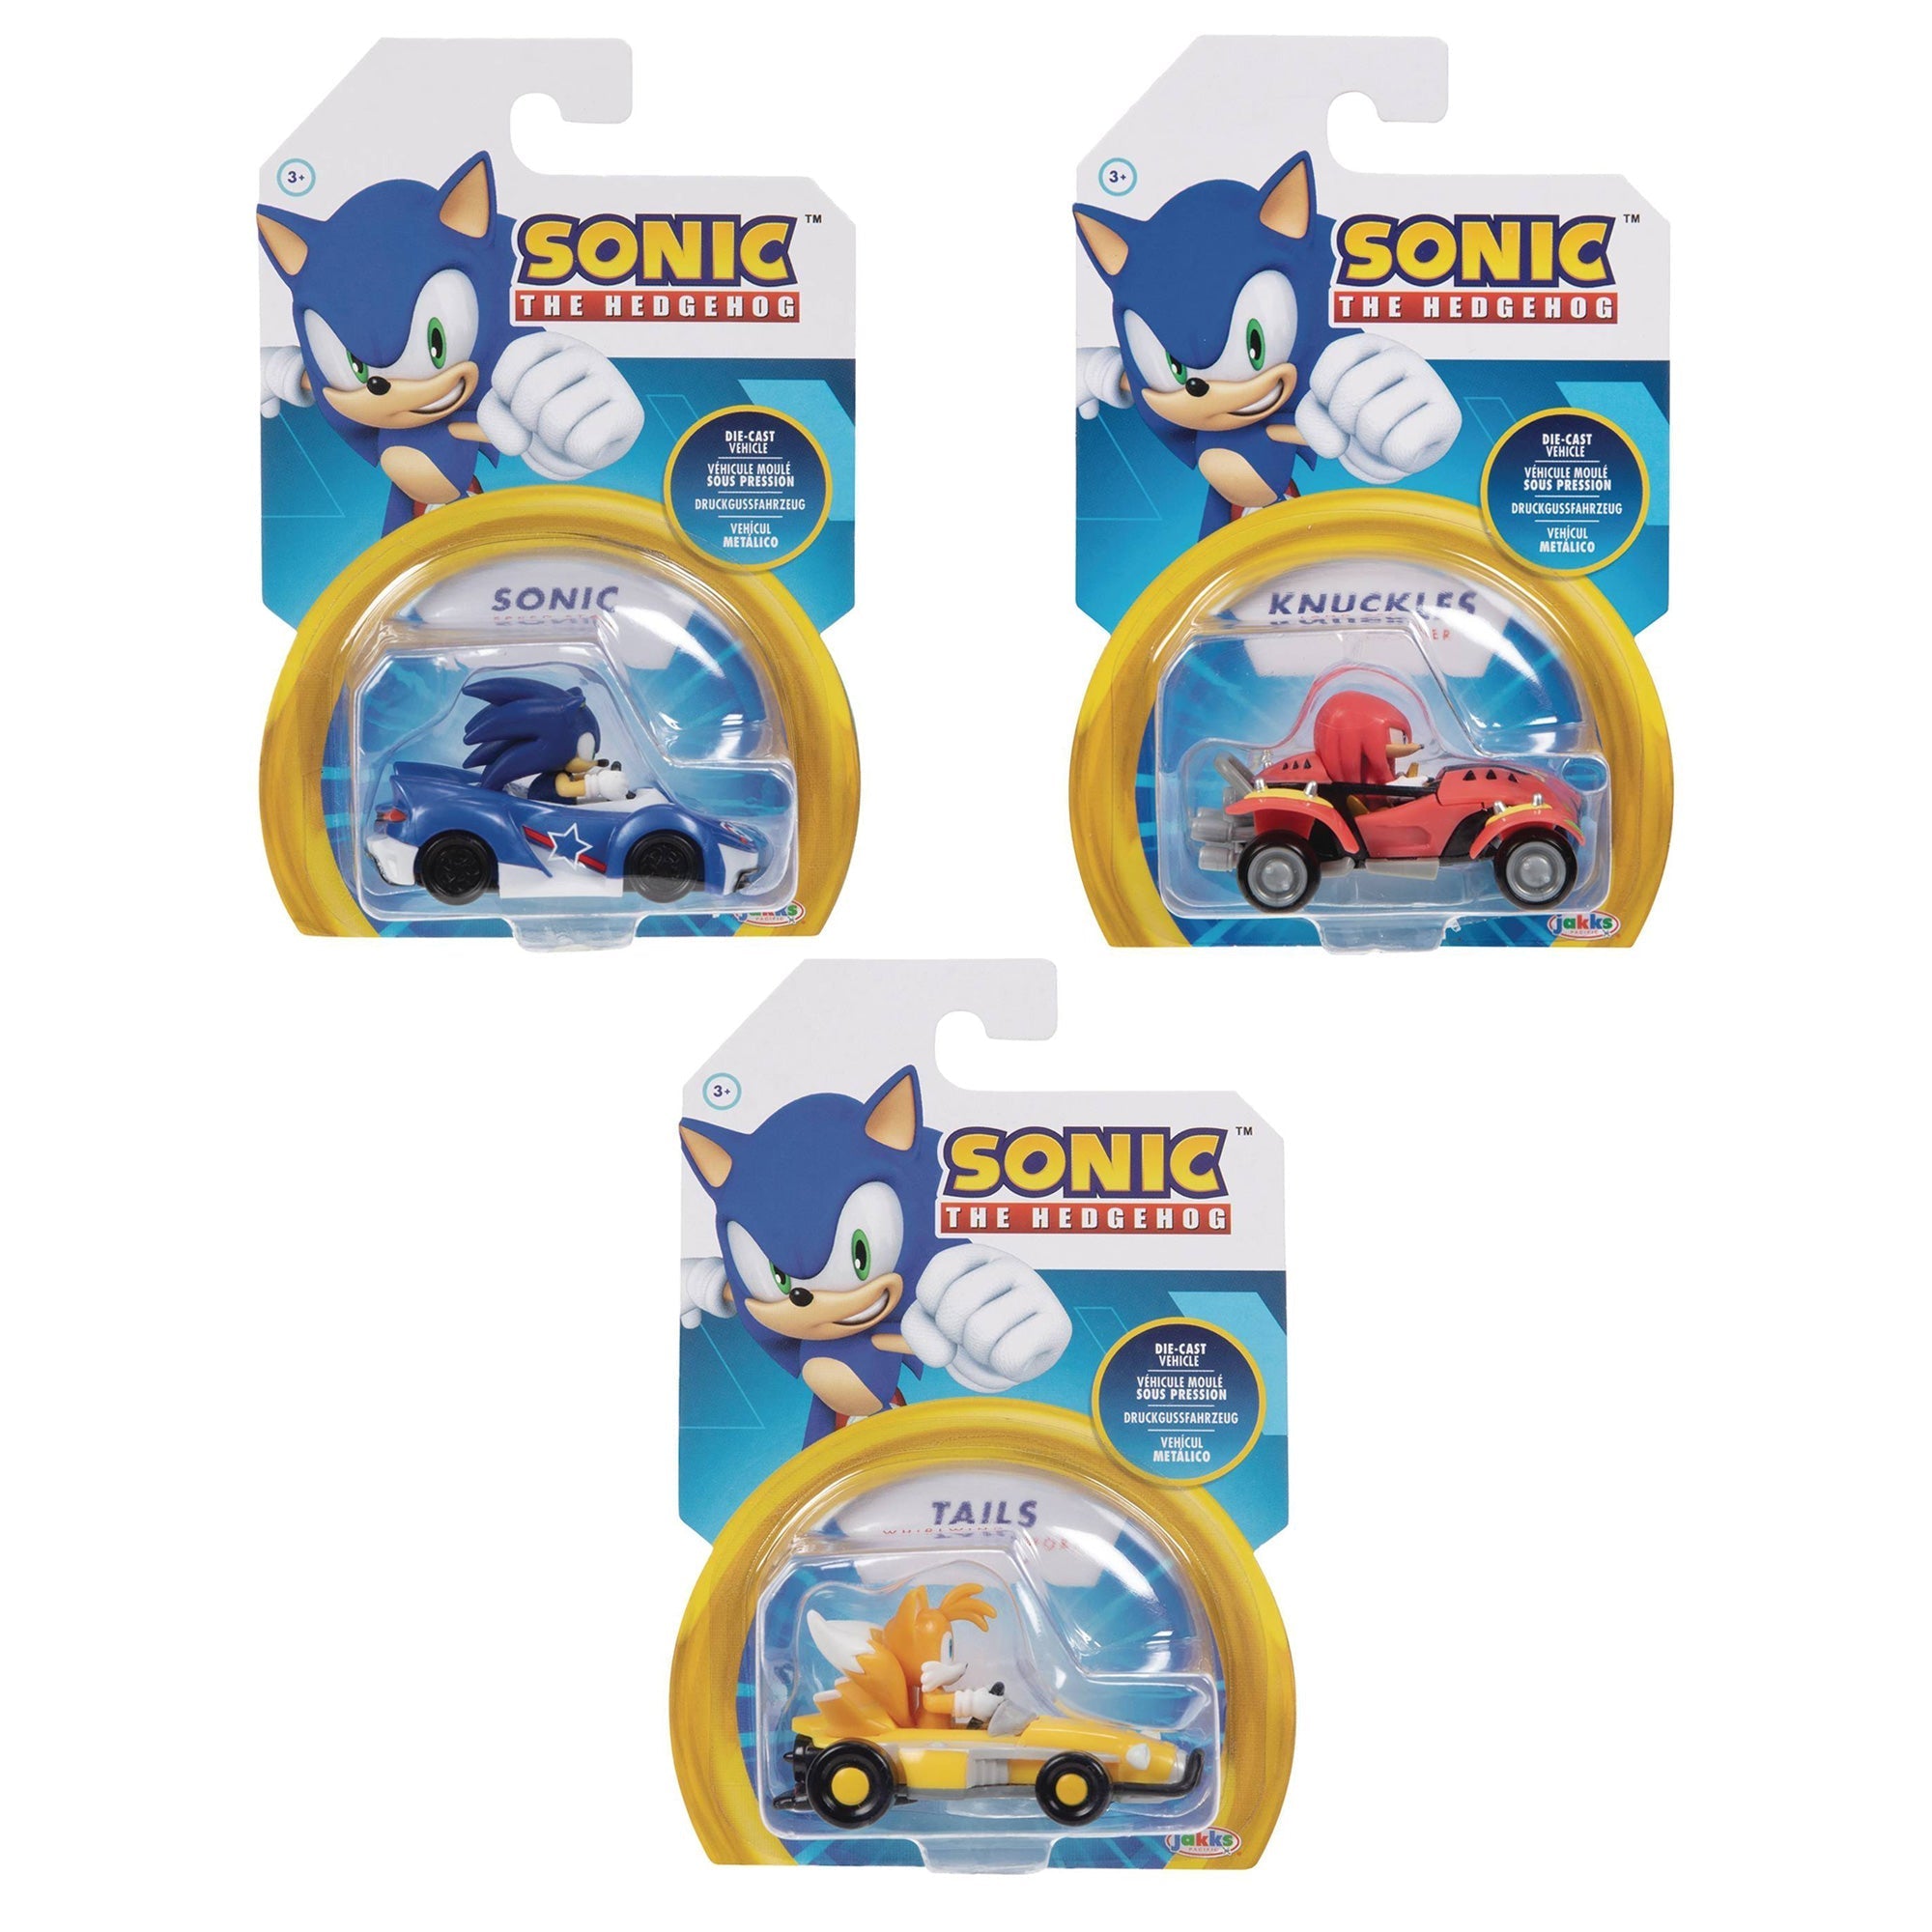 Sonic the Hedgehog Die-Cast Vehicle, Assortment, 1 Count